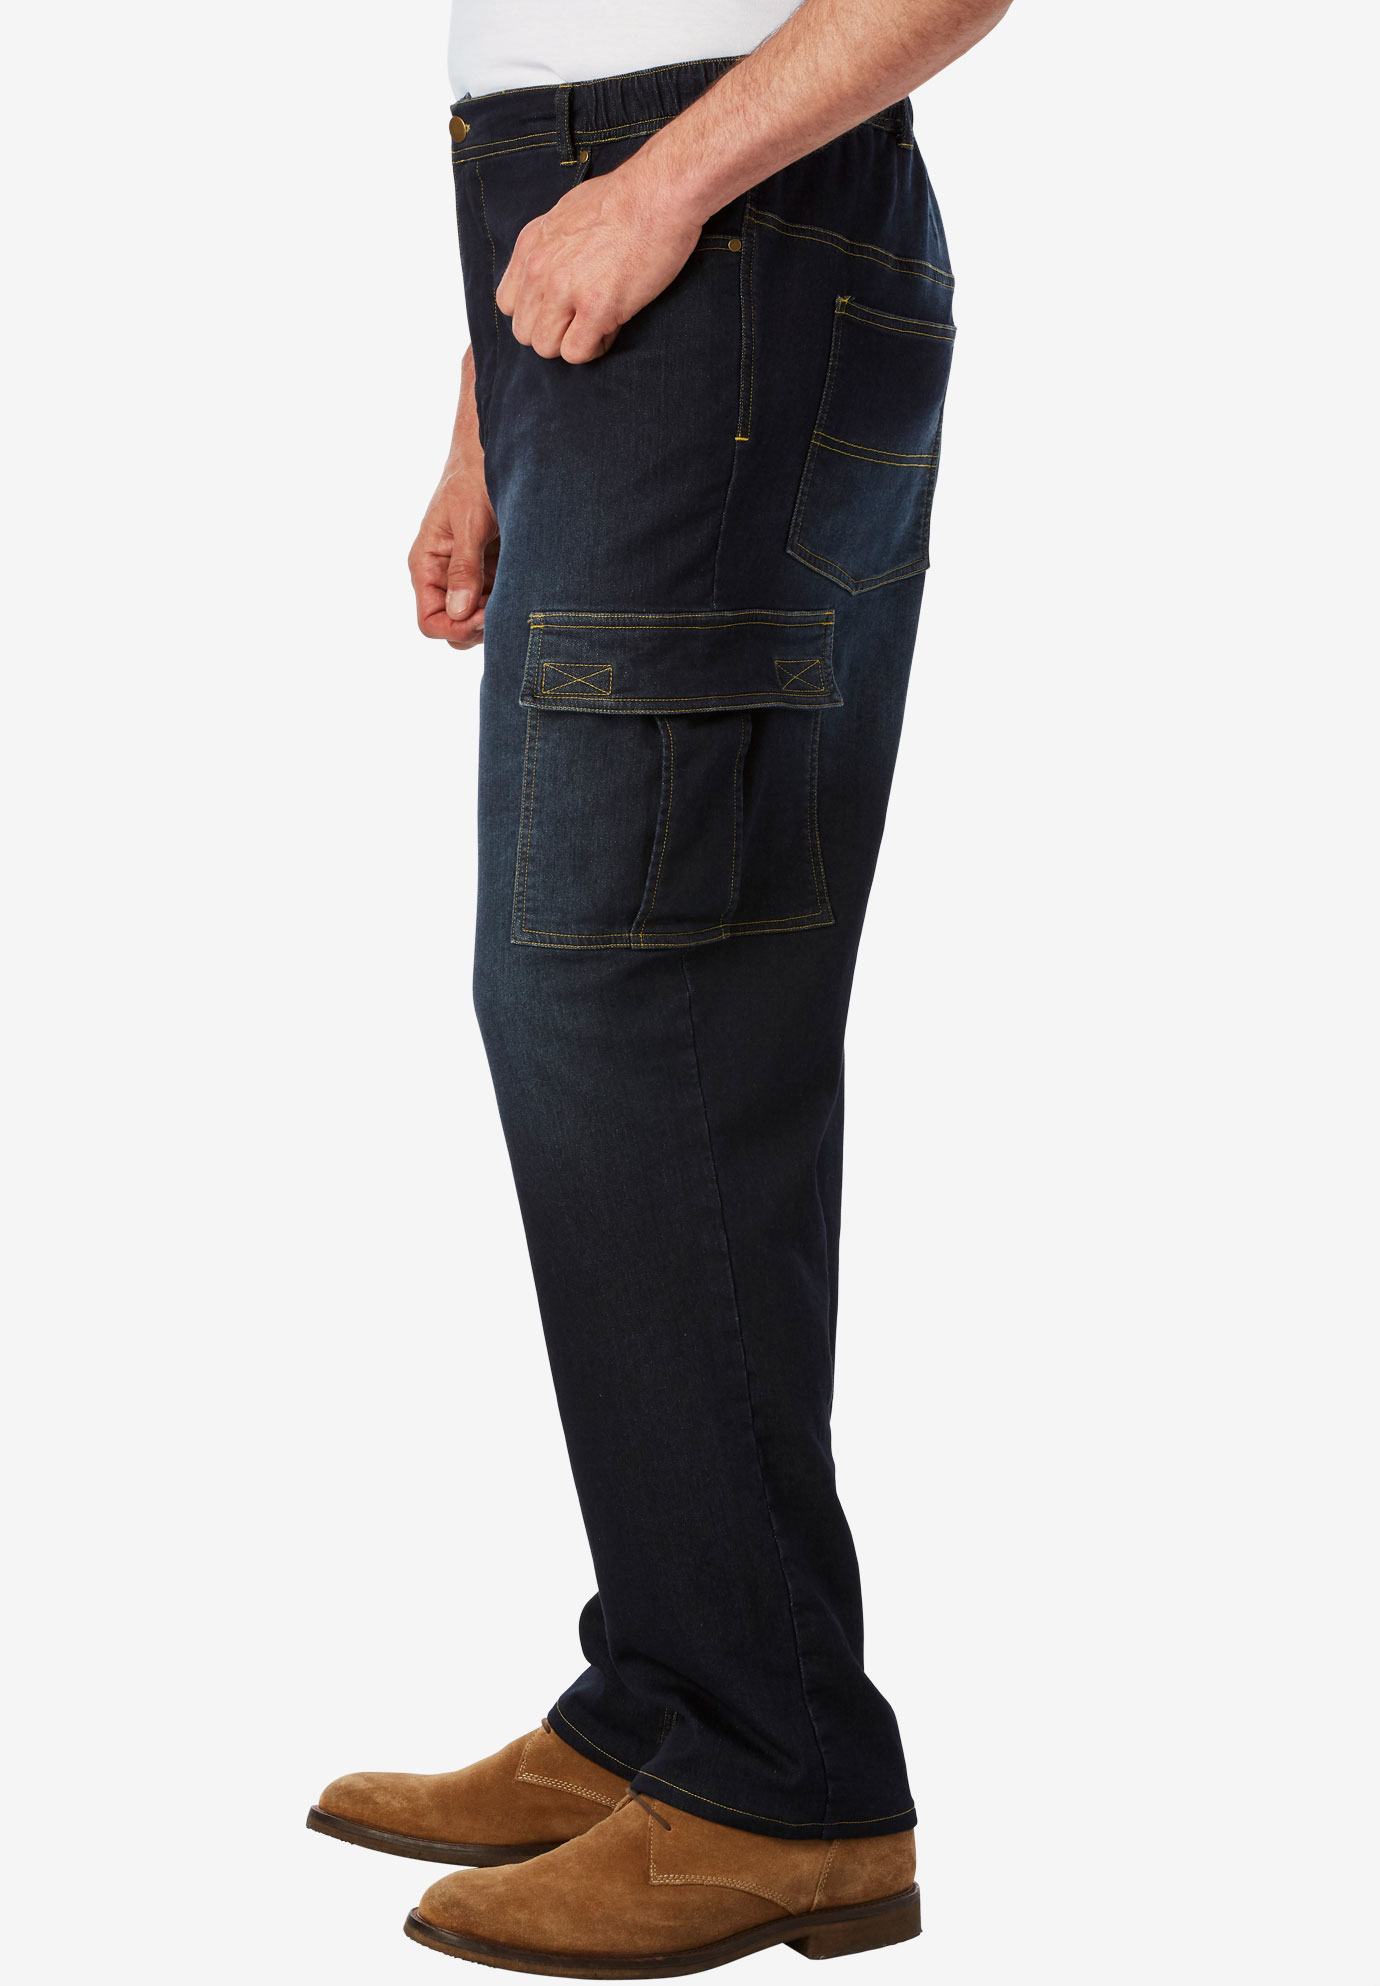 Kingsize Men's Big & Tall Relaxed Fit Cargo Denim Look Sweatpants Jeans - image 4 of 6